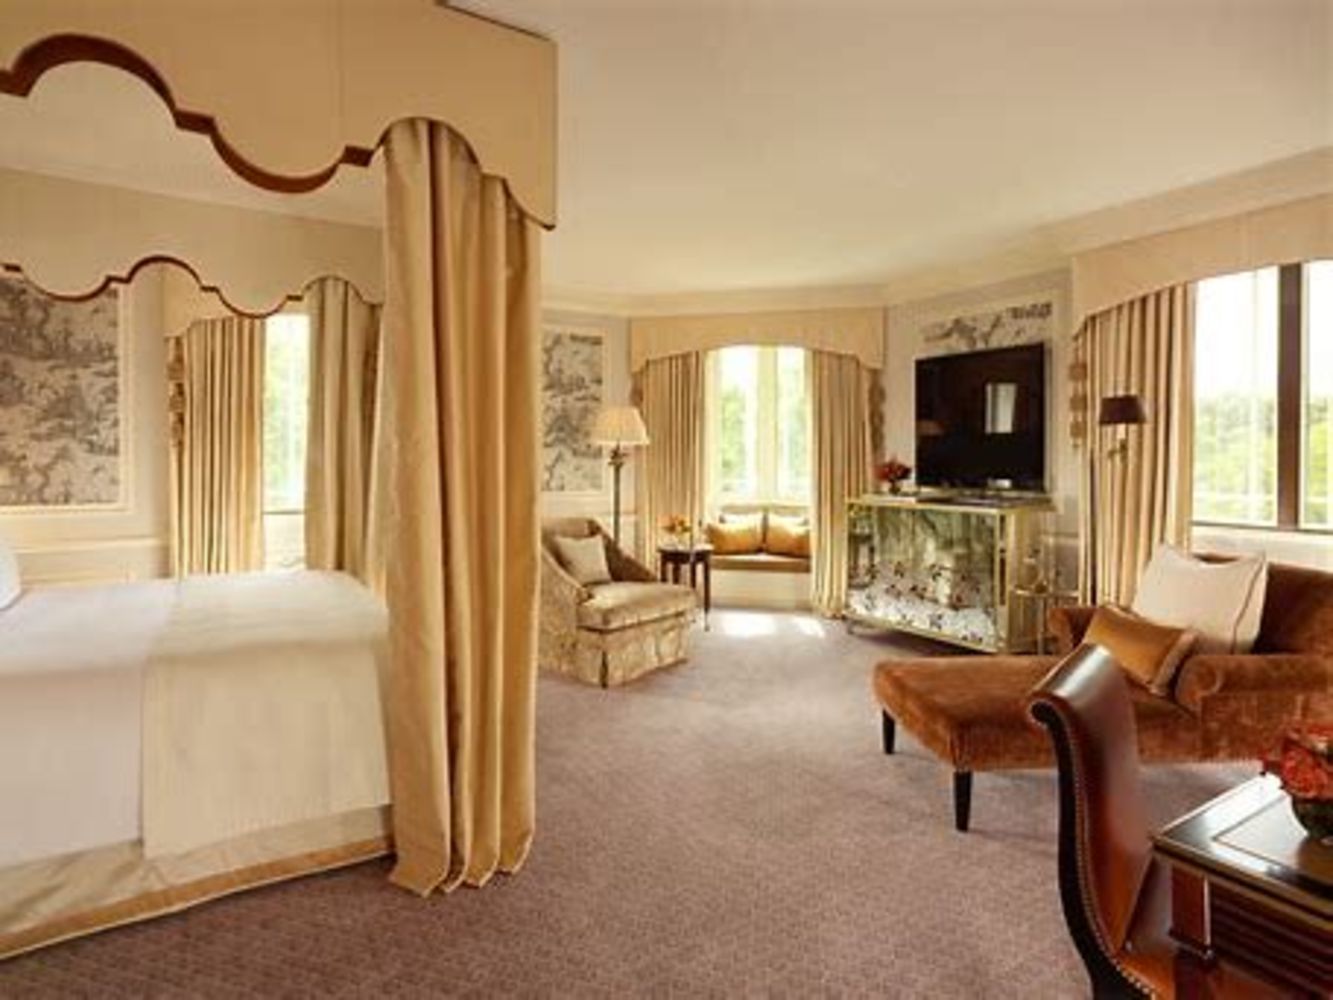 The Dorchester Hotel London, Luxury Furniture Fixtures & Fittings Guest Bedrooms Floor 7